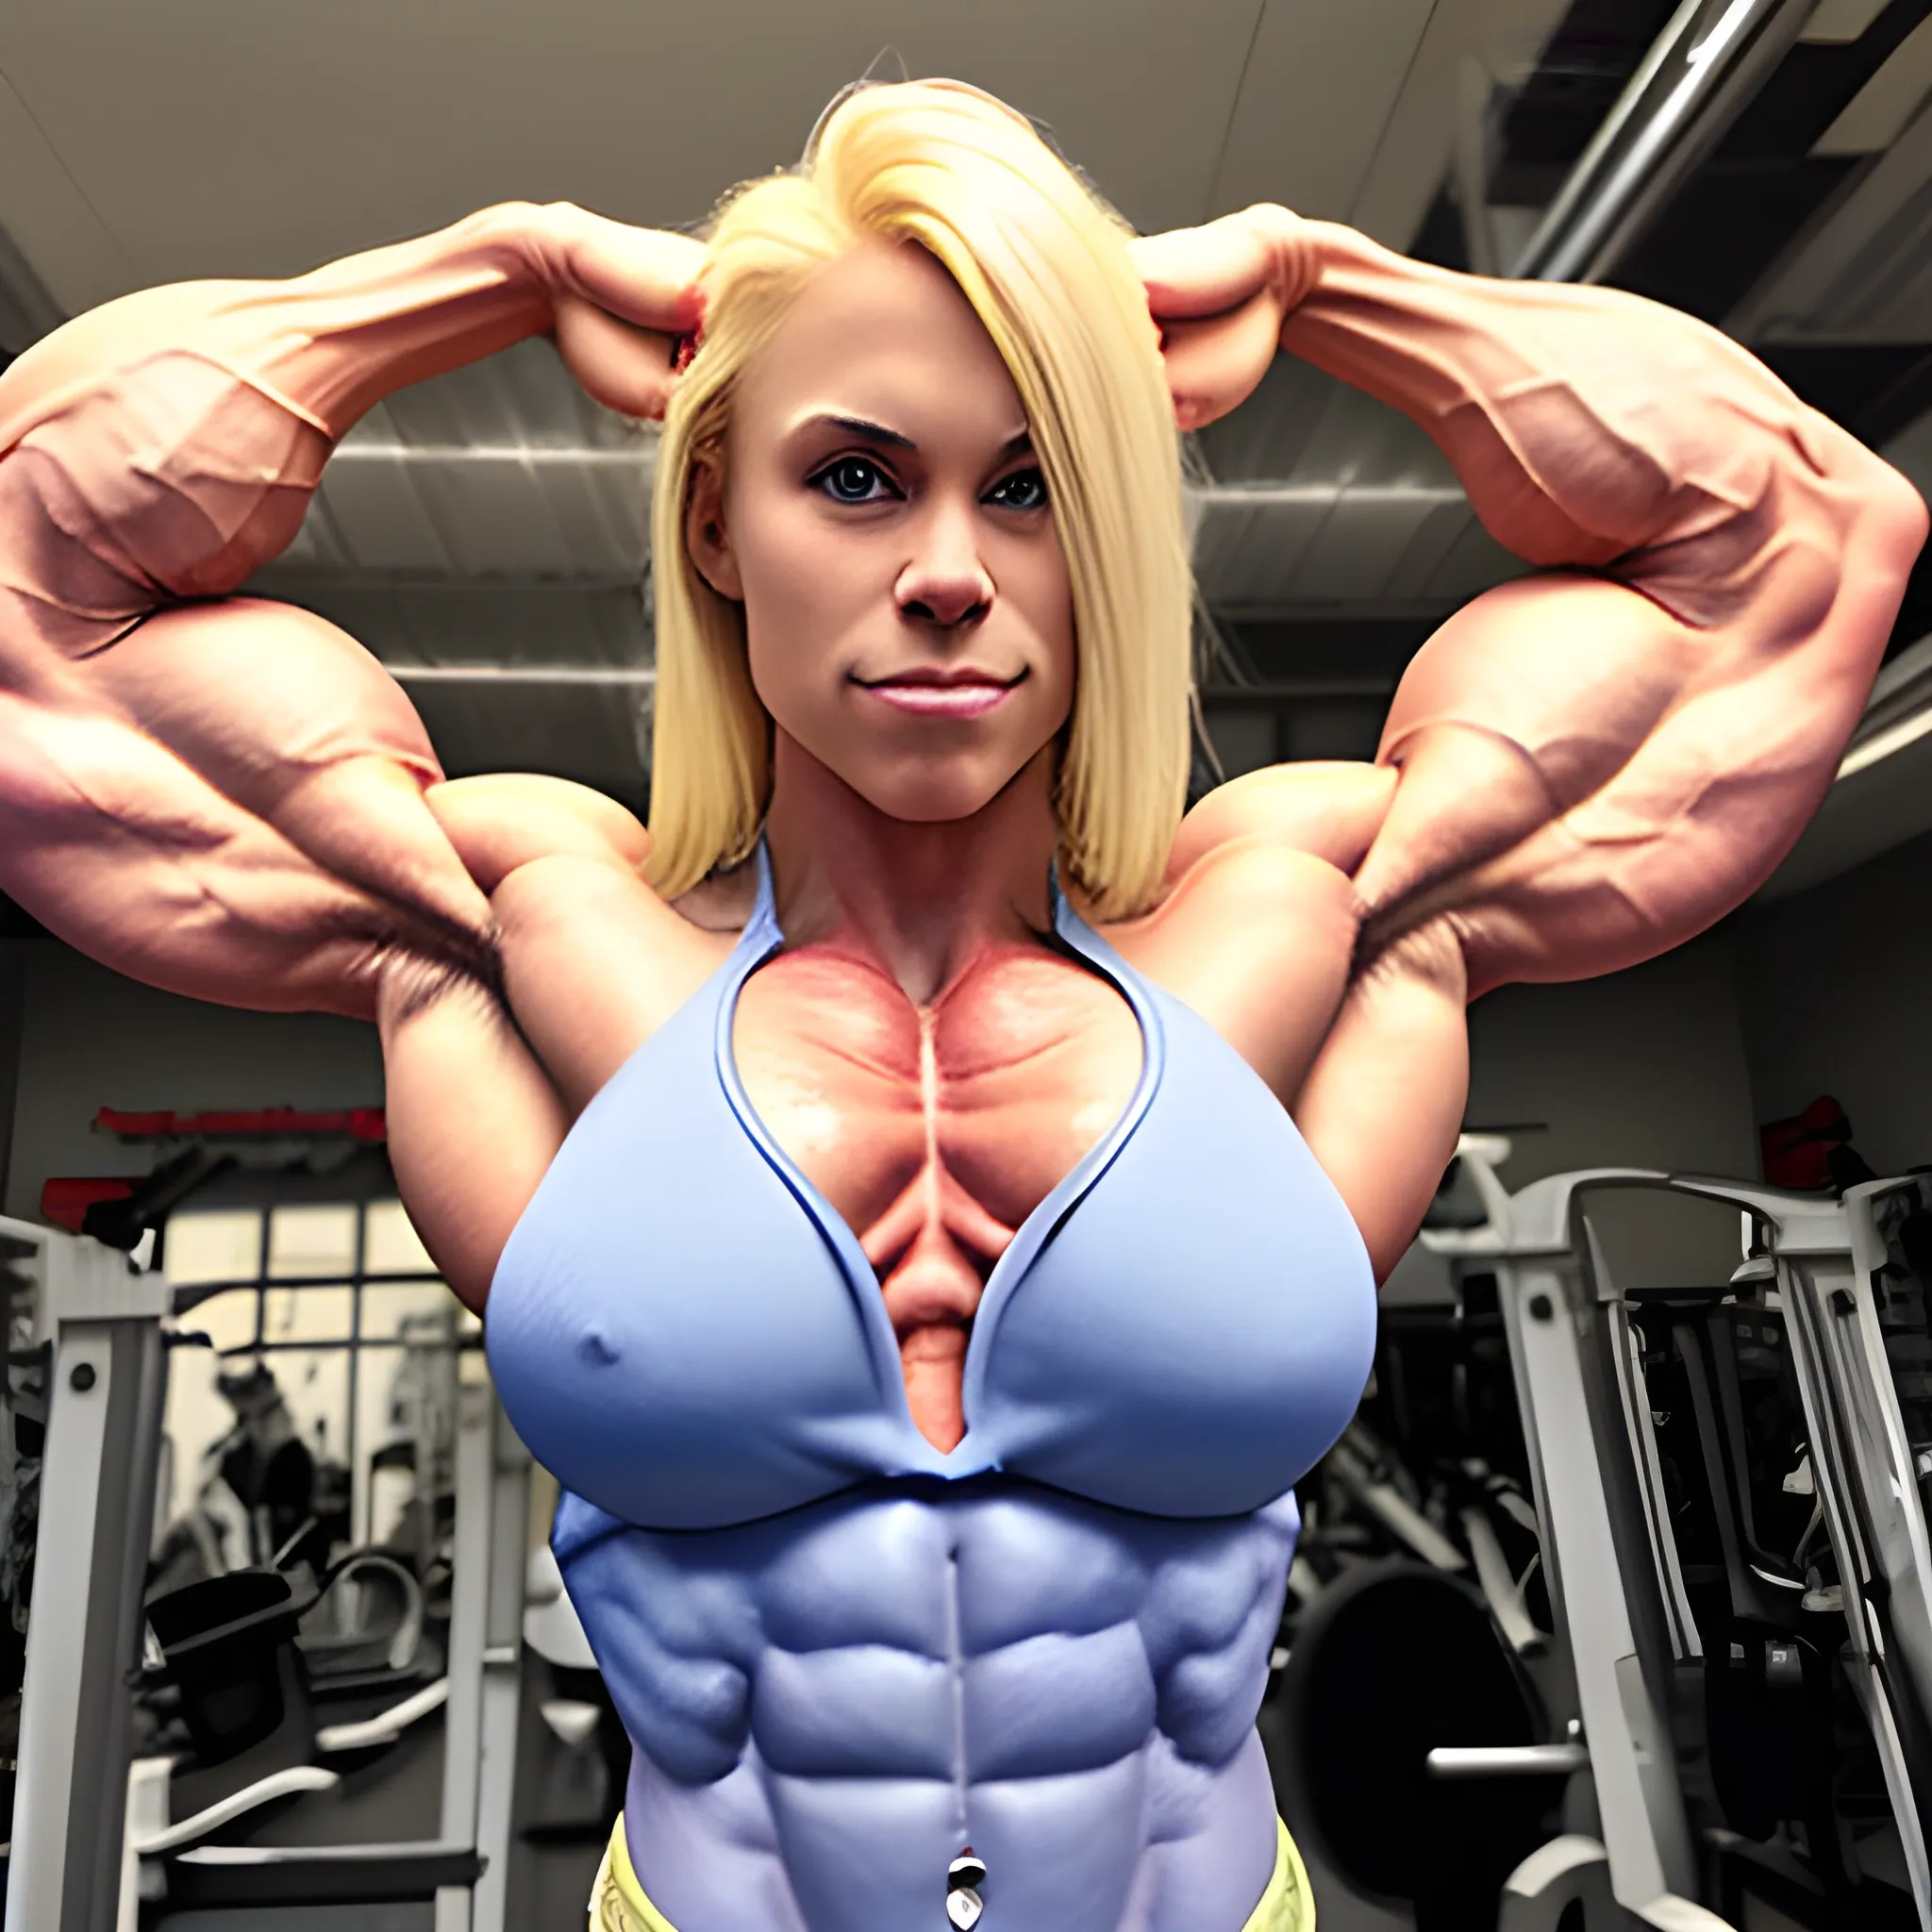 20 year old blonde woman with hyper large shredded muscles, super vascular, and super human strength